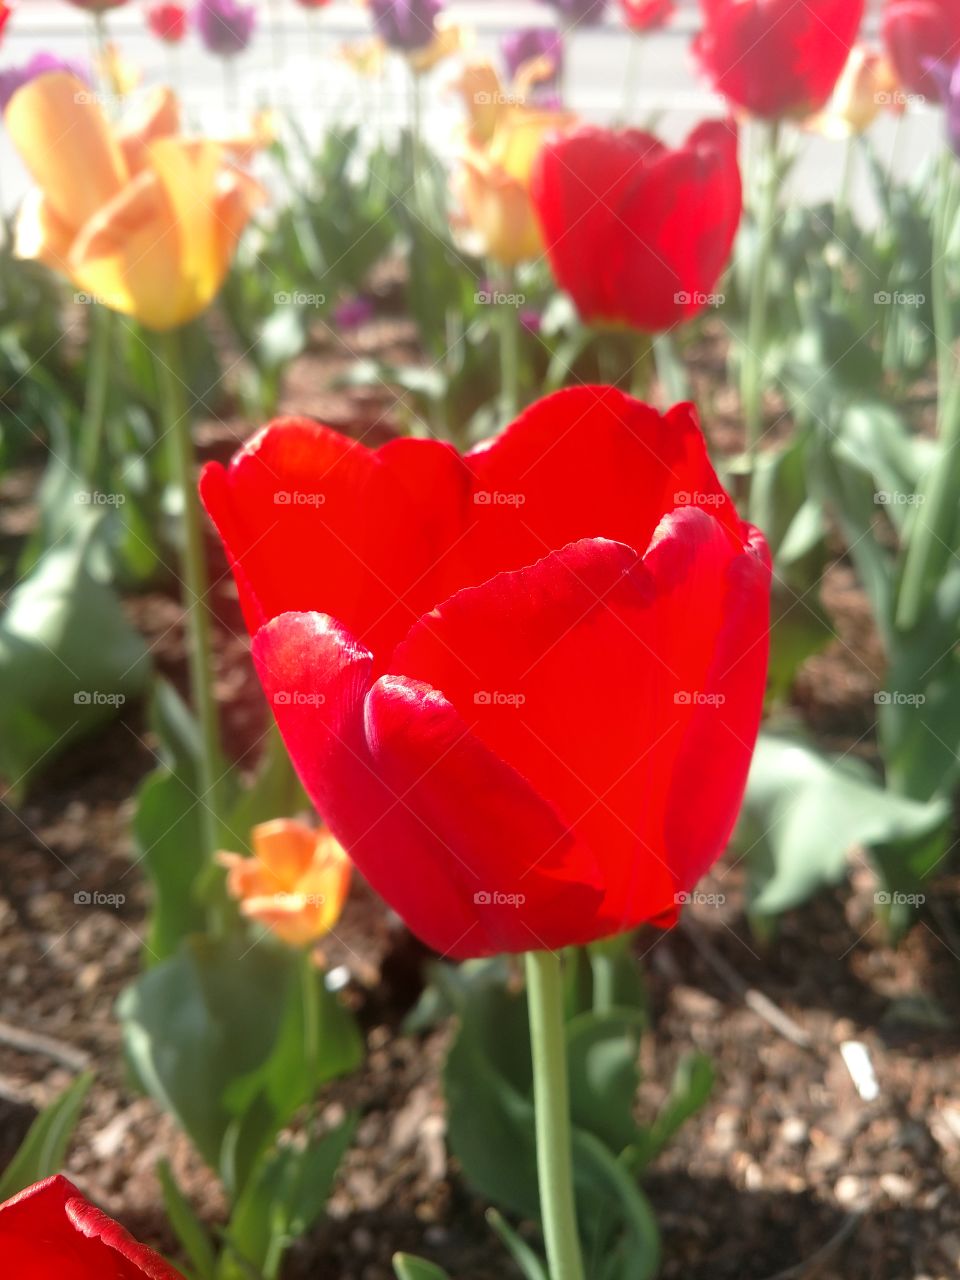 it's a lovely picture of a tulip